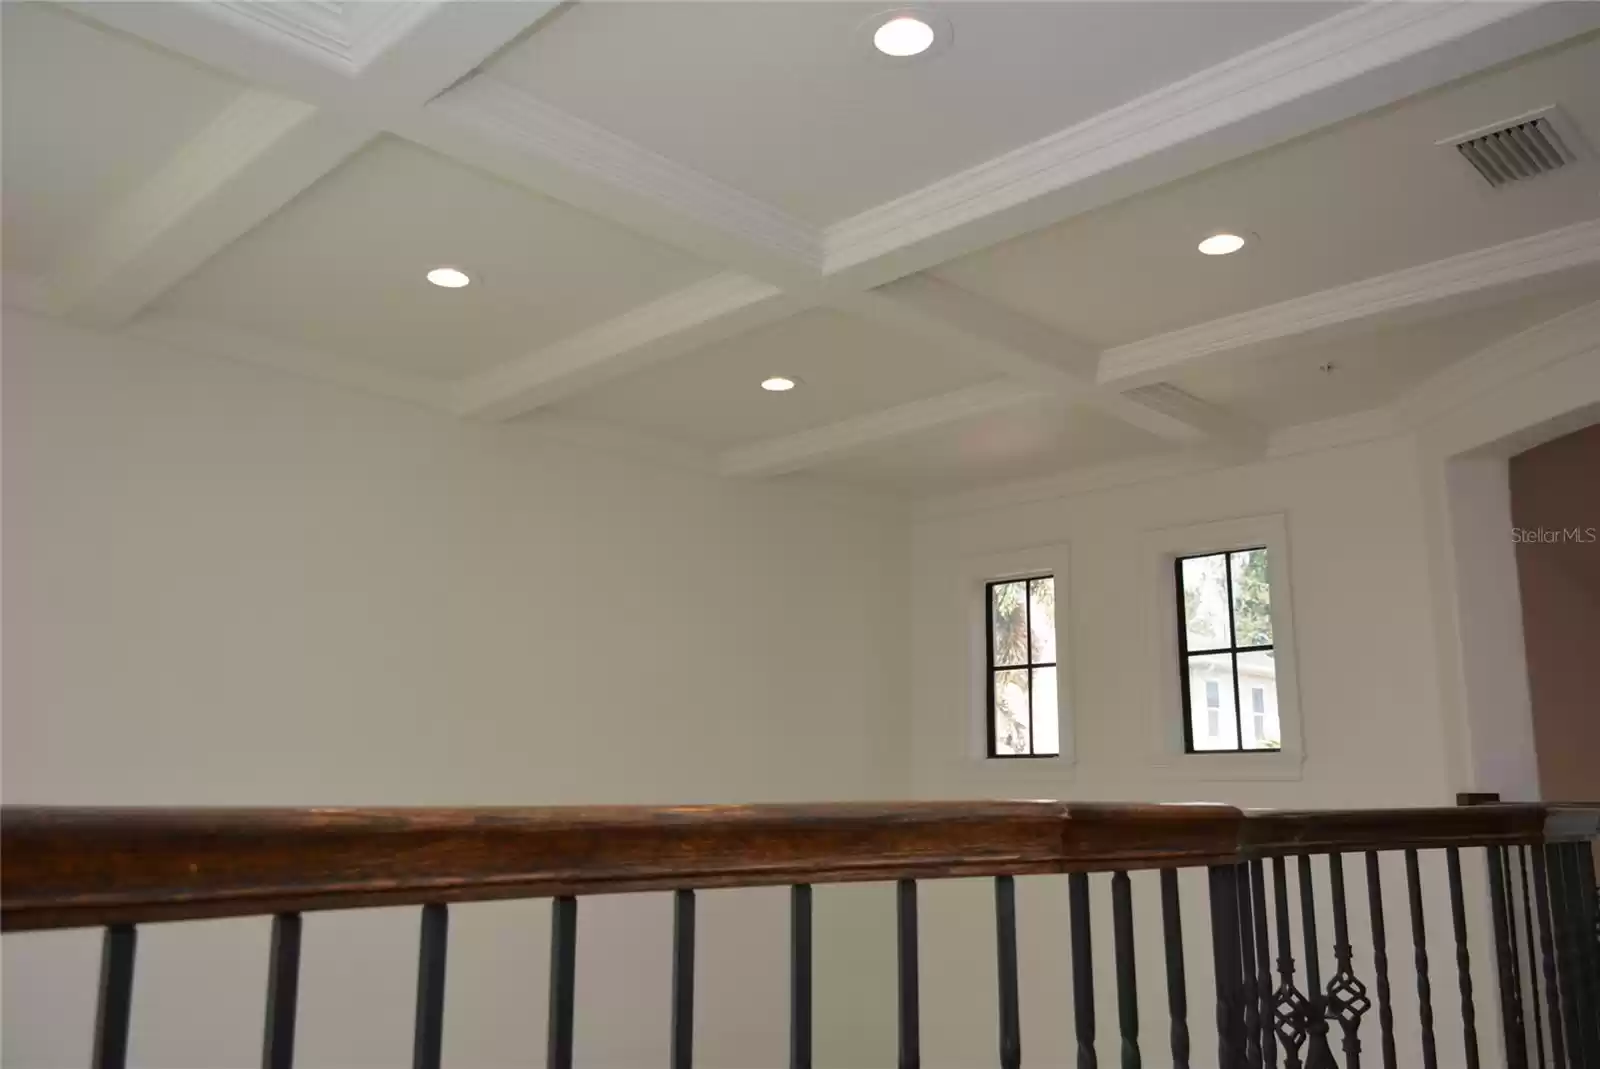 Beautiful coffered ceiling over the living room add architectural interest.